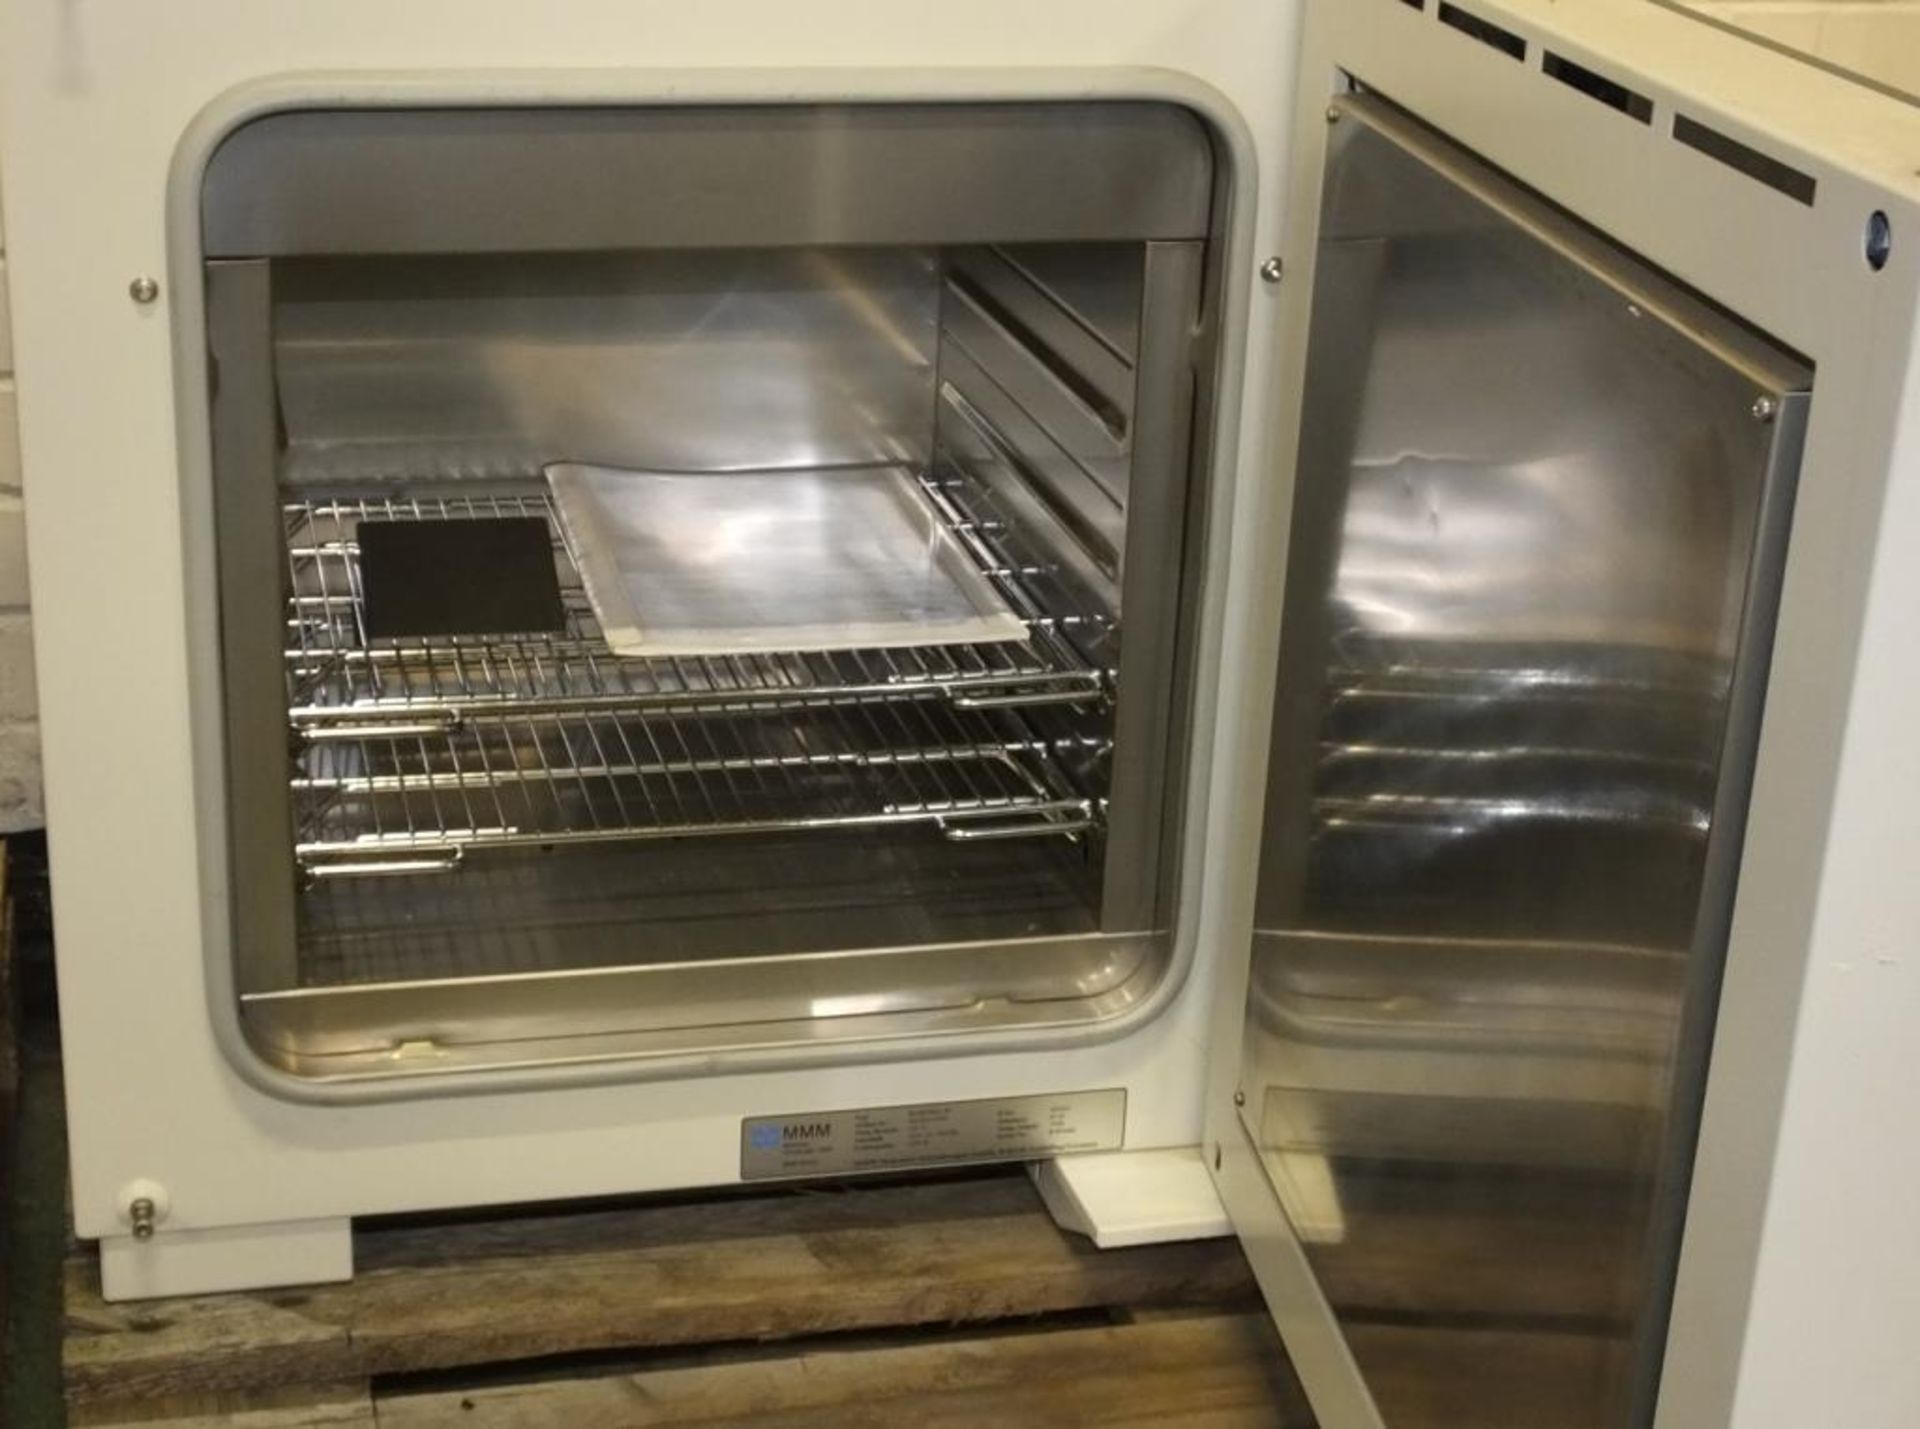 MMM Ecocell Drying Oven - Image 4 of 4